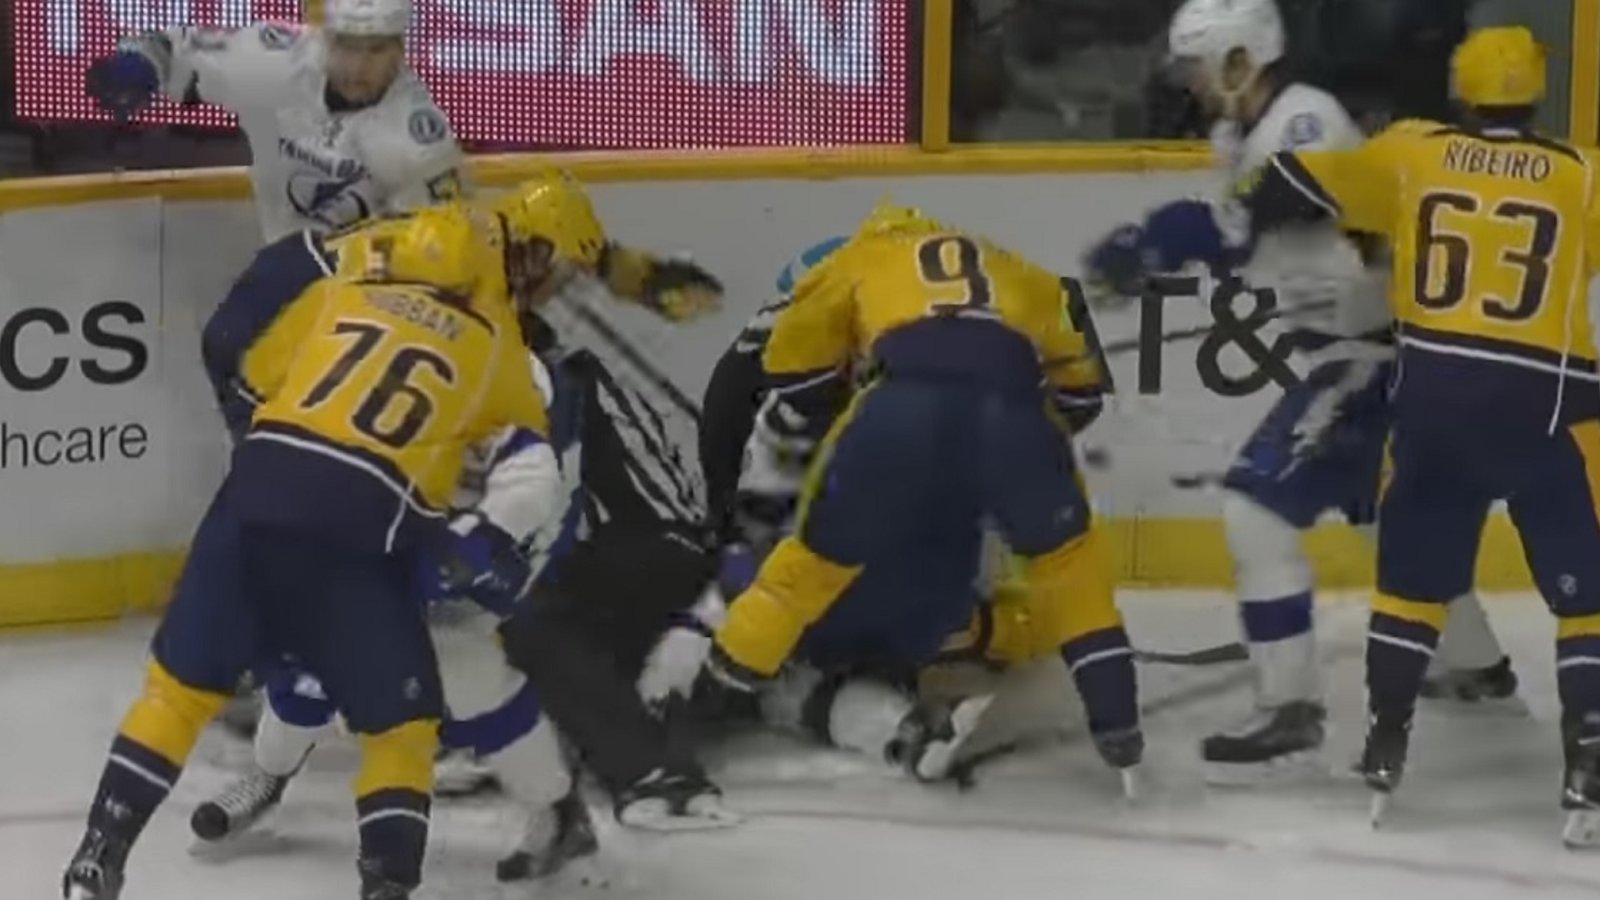 Brawl breaks out after a late blindside hit on Monday night!